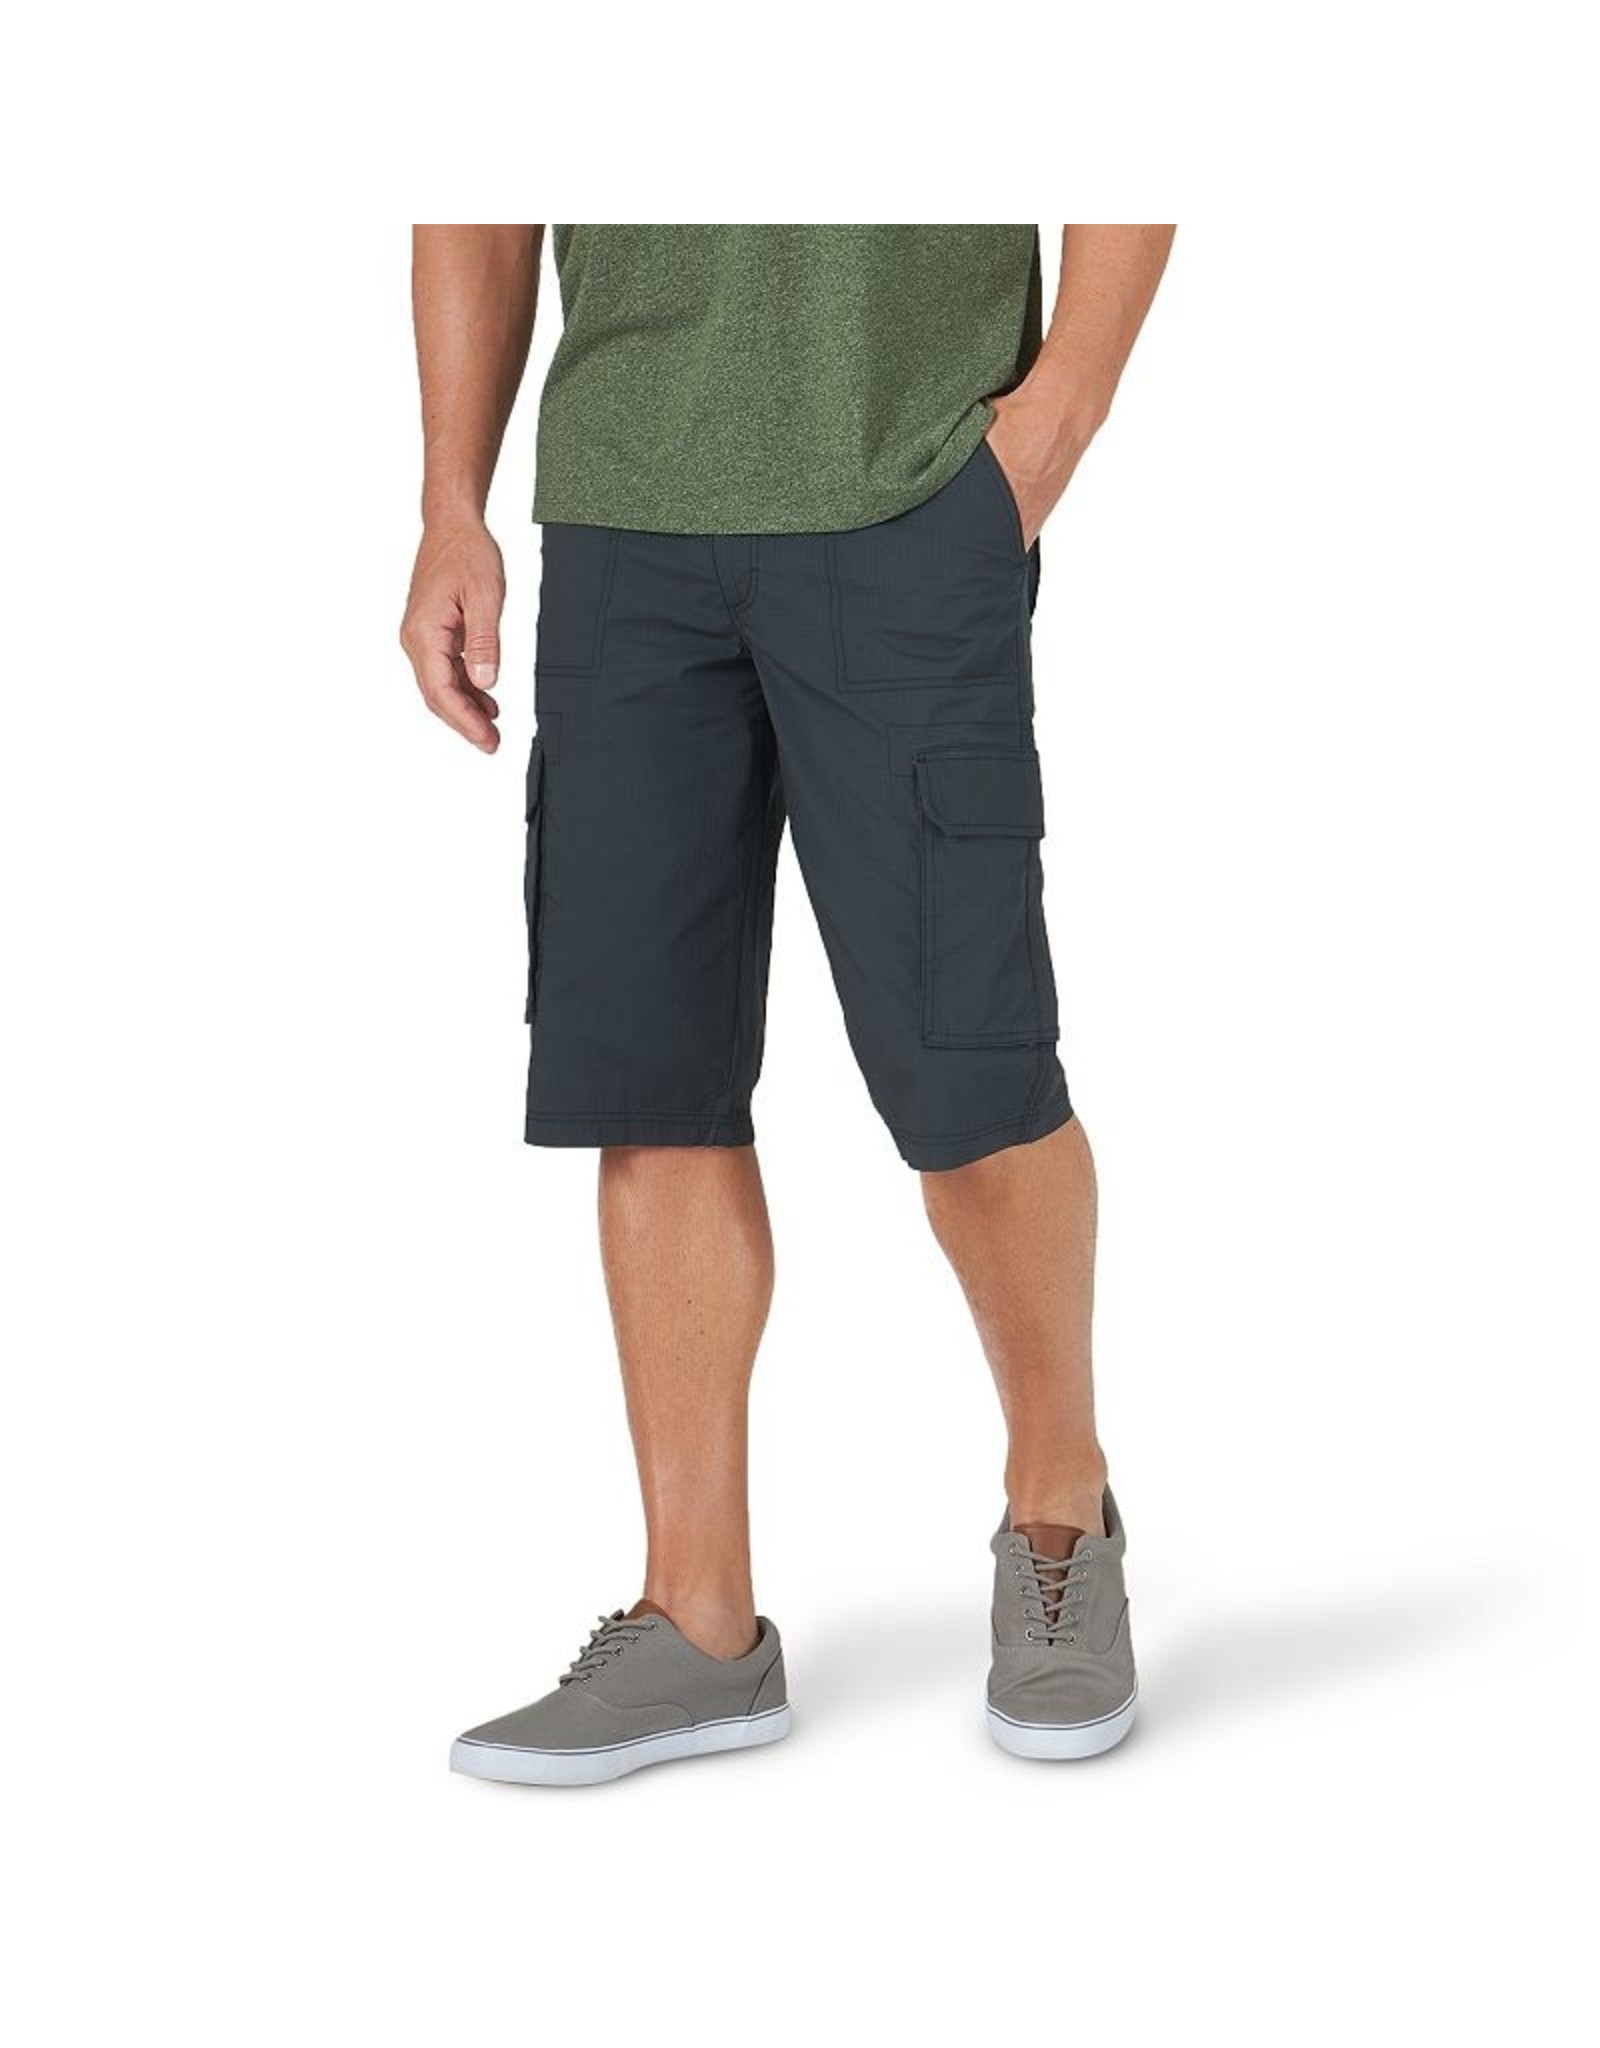 LEE- Extreme Motion Cameron Cargo Short-112314312 - Oly's Home Fashion